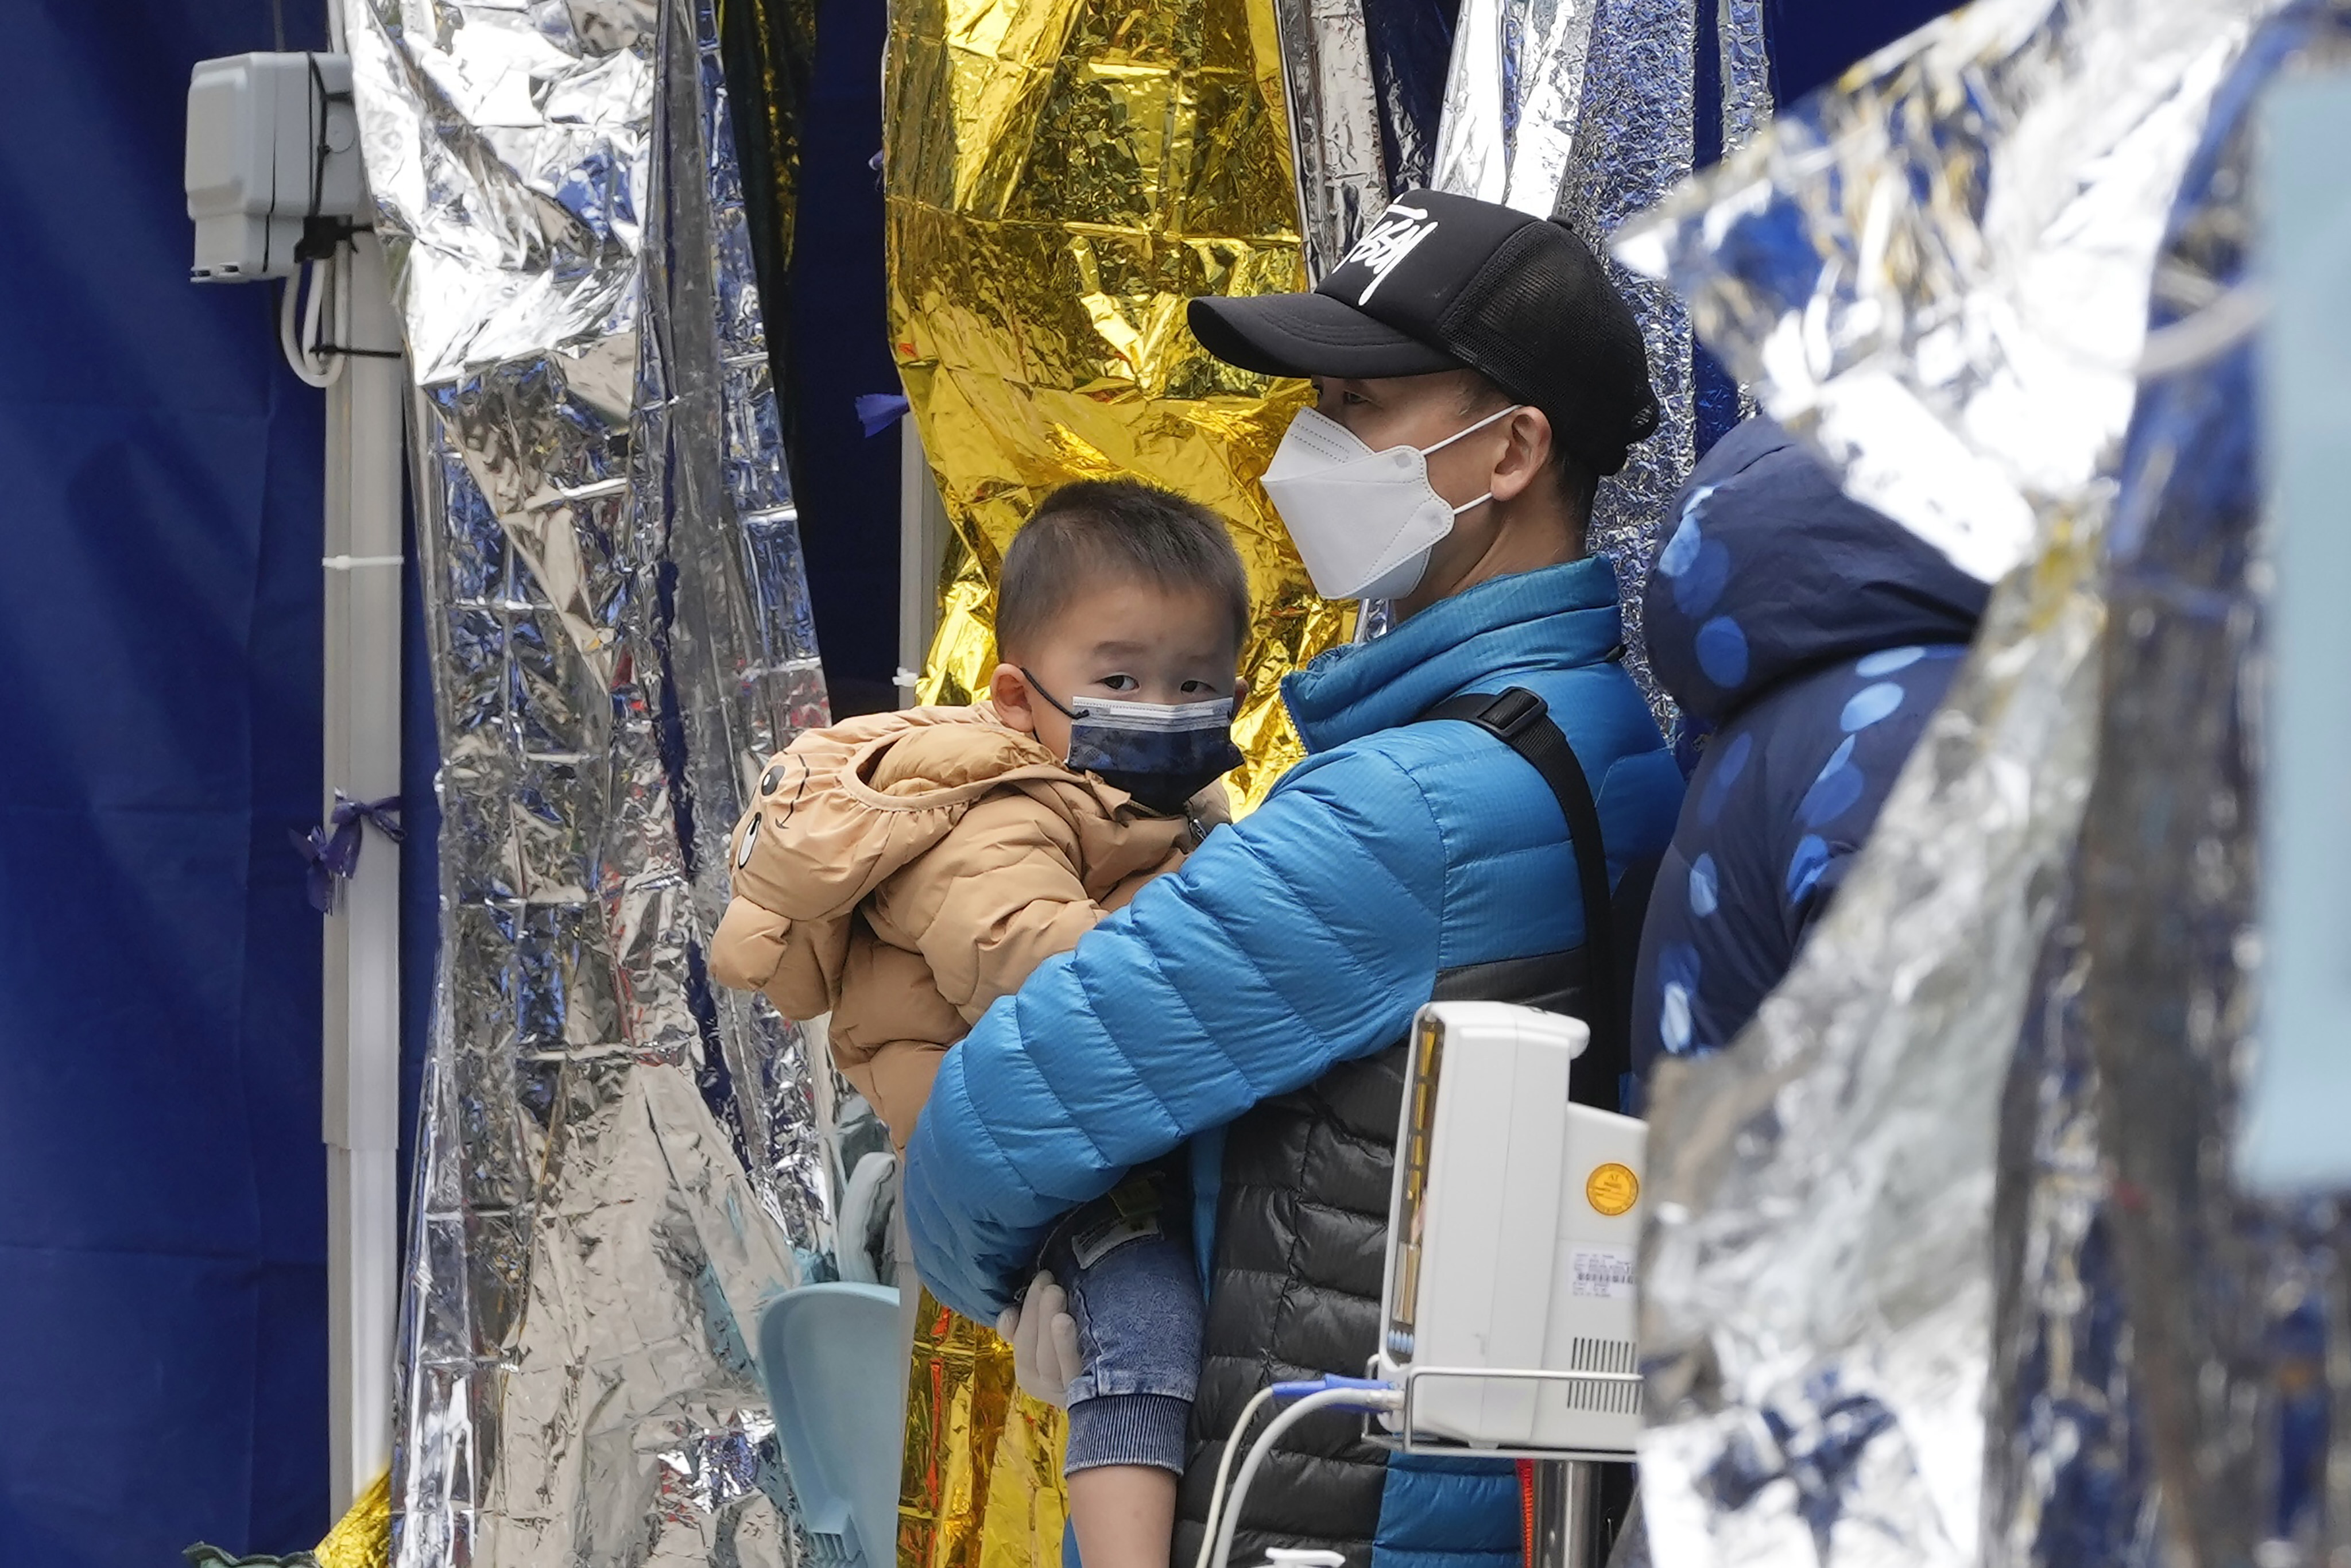 A man and child wait at a temporary treatment area outside a hospital on February 18. Since the start of the pandemic, Hong Kong has maintained a policy of isolating and hospitalising all positive cases, regardless of age, leading to fears of family separation. Photo: AP